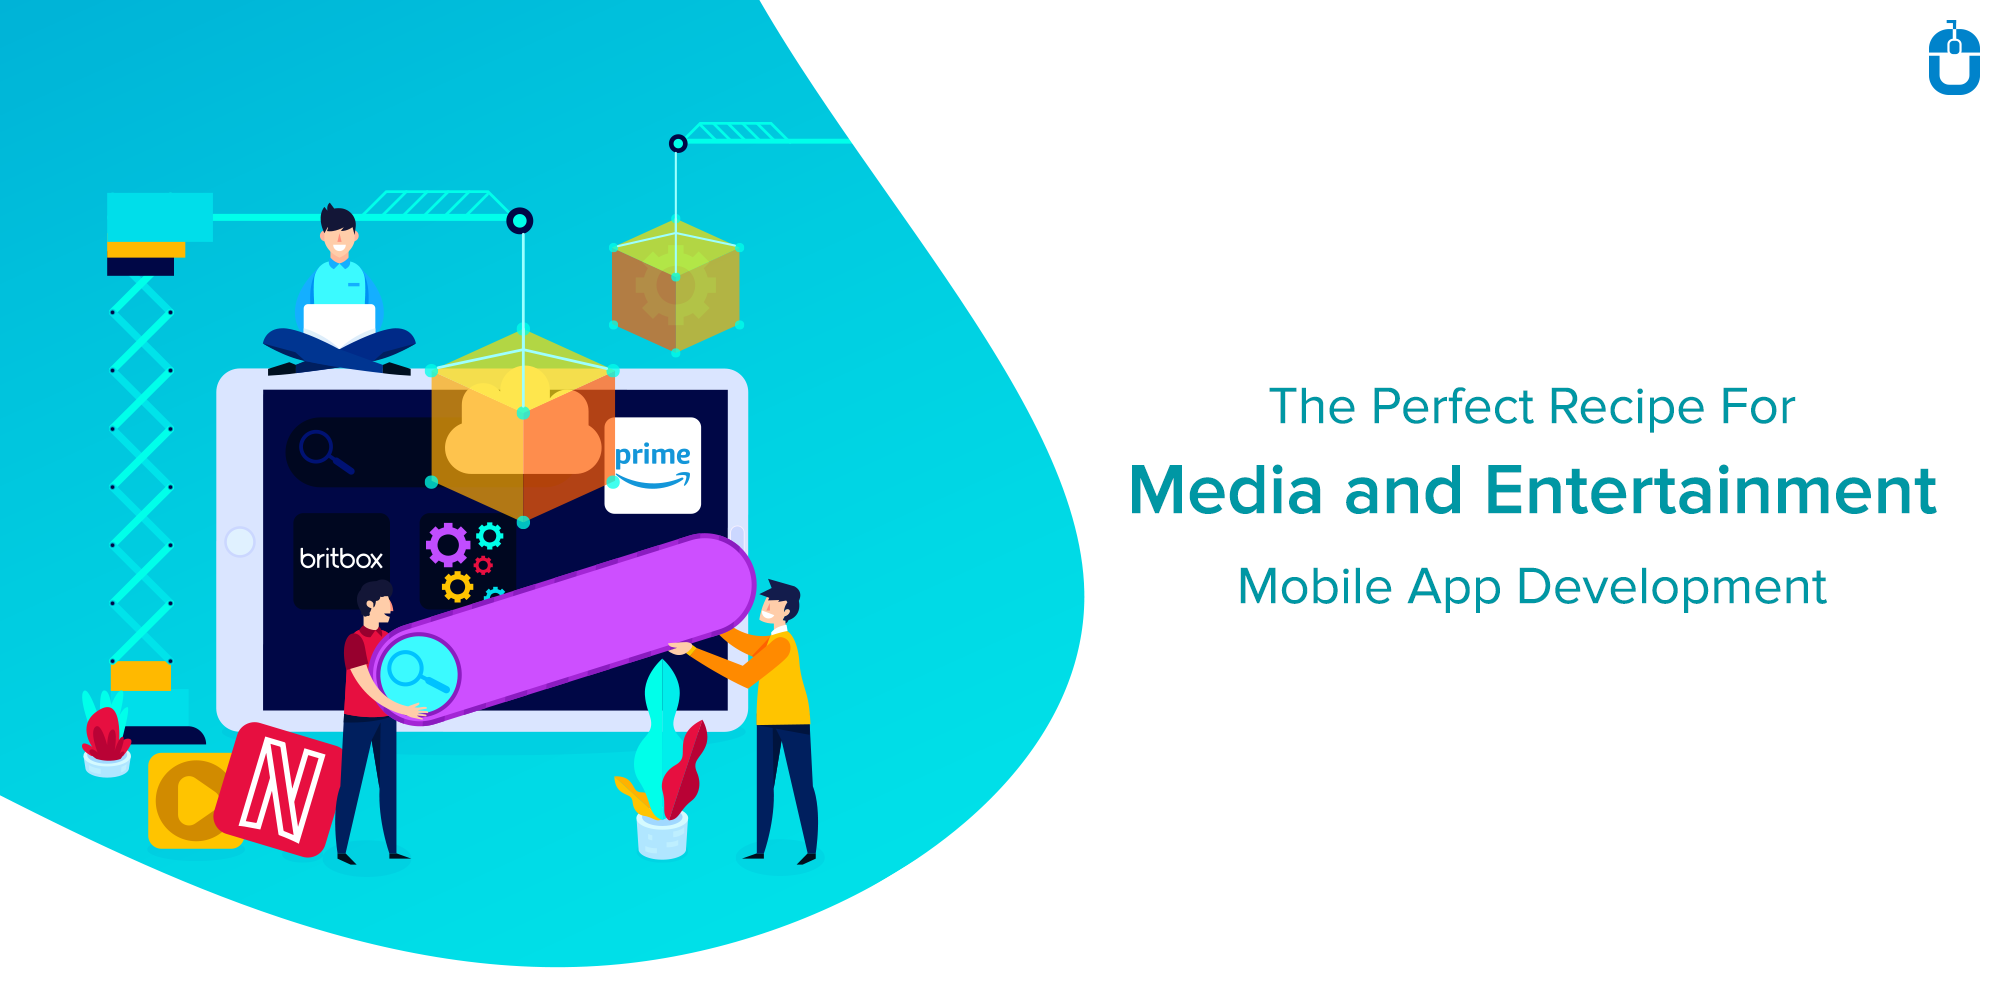 The Perfect Recipe For Media and Entertainment Mobile App Development